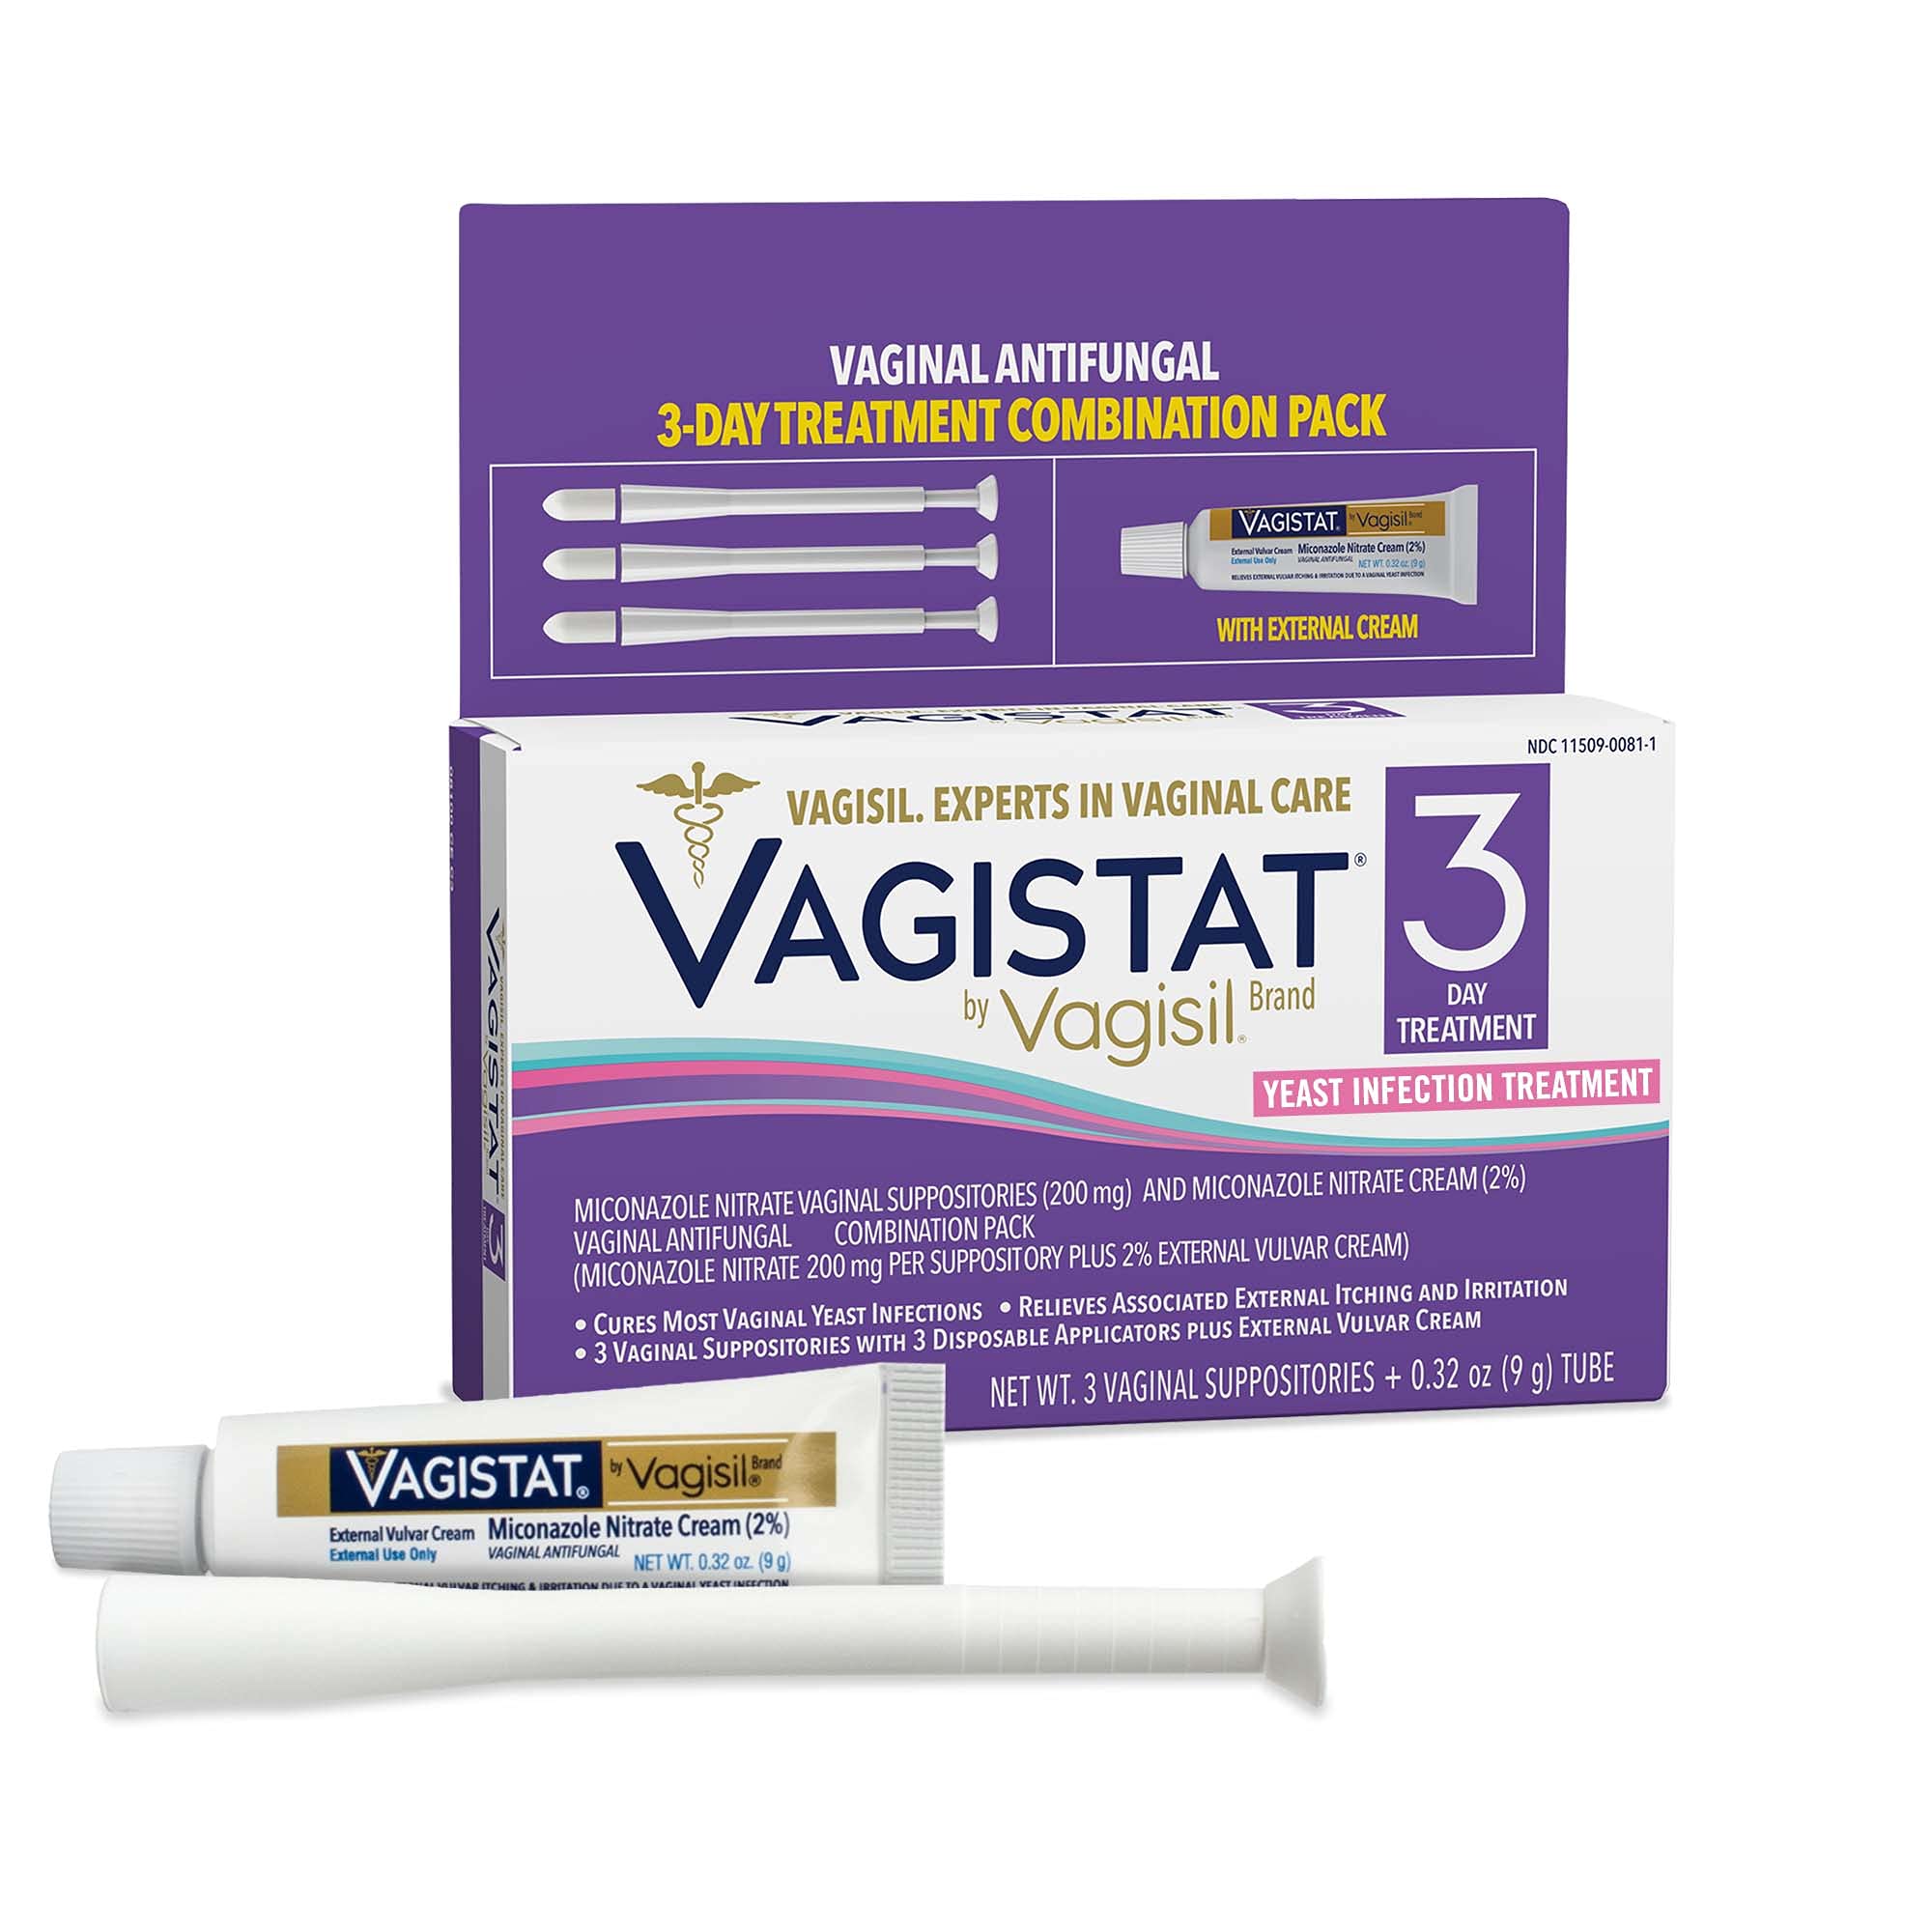 Vagistat 3 Day Yeast Infection Treatment for Women, Helps Relieve External Itching and Irritation - Contains 2% External Miconazole Nitrate Cream & 3 Disposable Suppositories & Applicators, by Vagisil